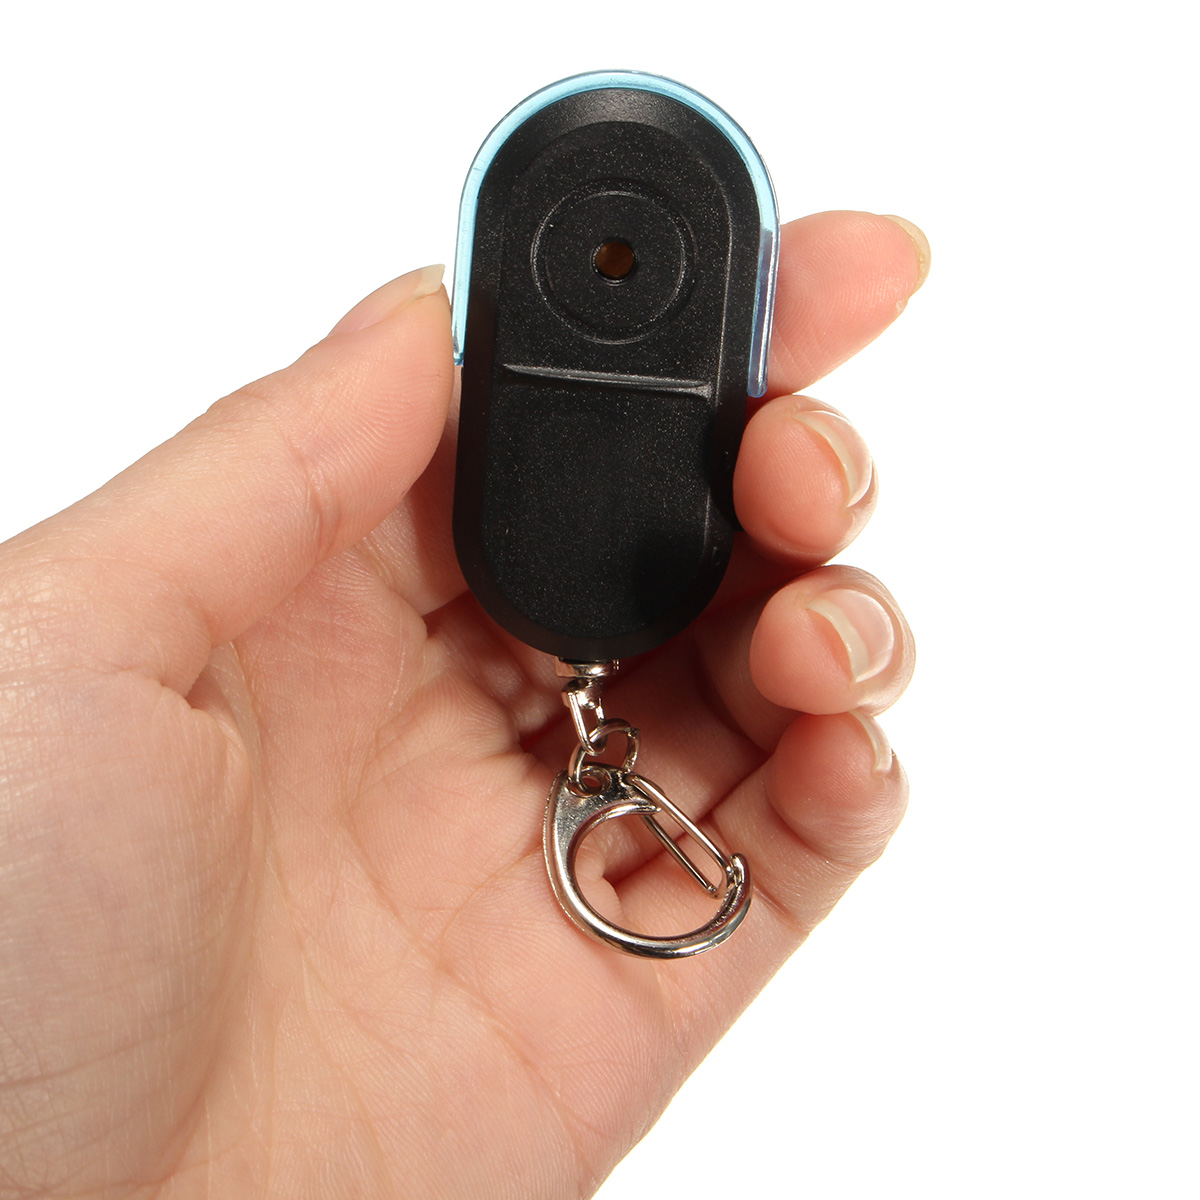 Wireless-Anti-Lost-Alarm-Key-Finder-Locator-Keychain-Whistle-Sound-with-LED-Light-1030593-7